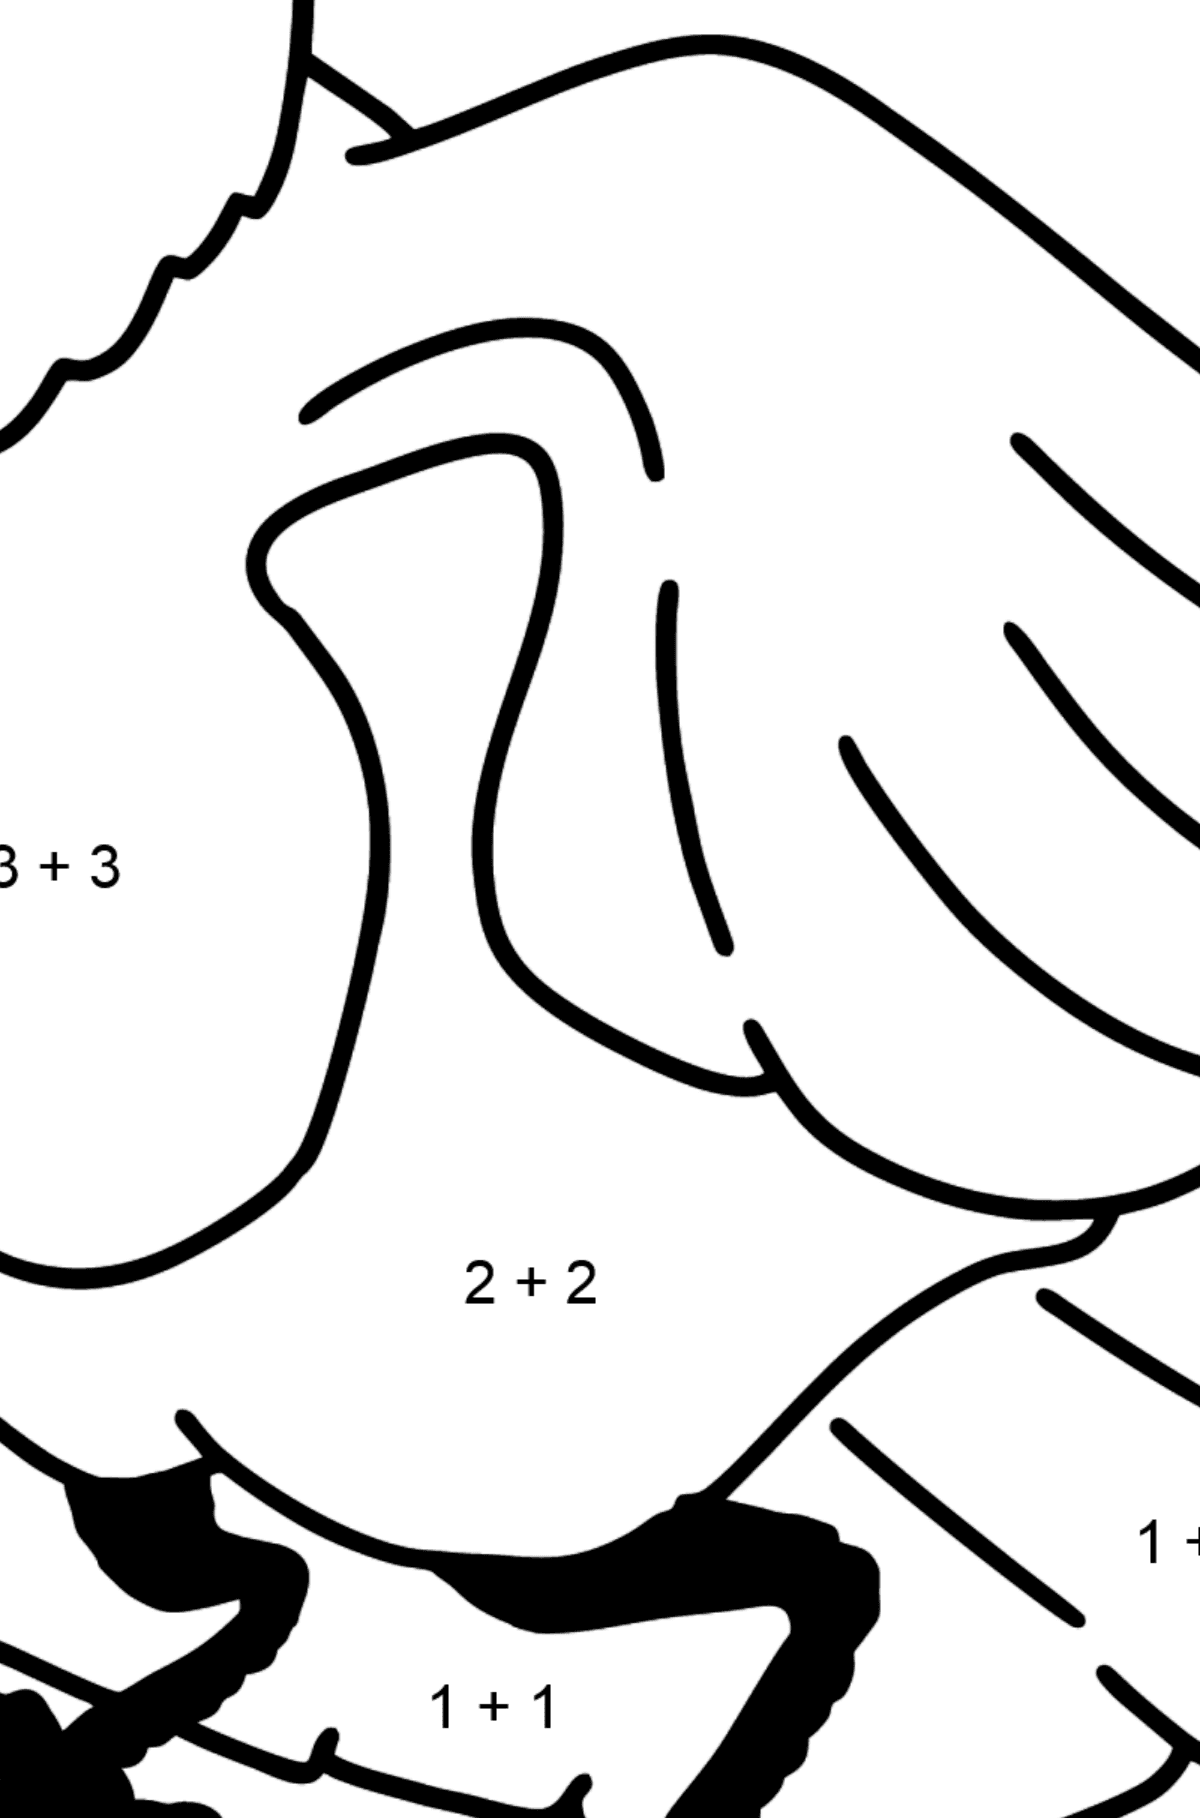 Dove coloring page - Math Coloring - Addition for Kids